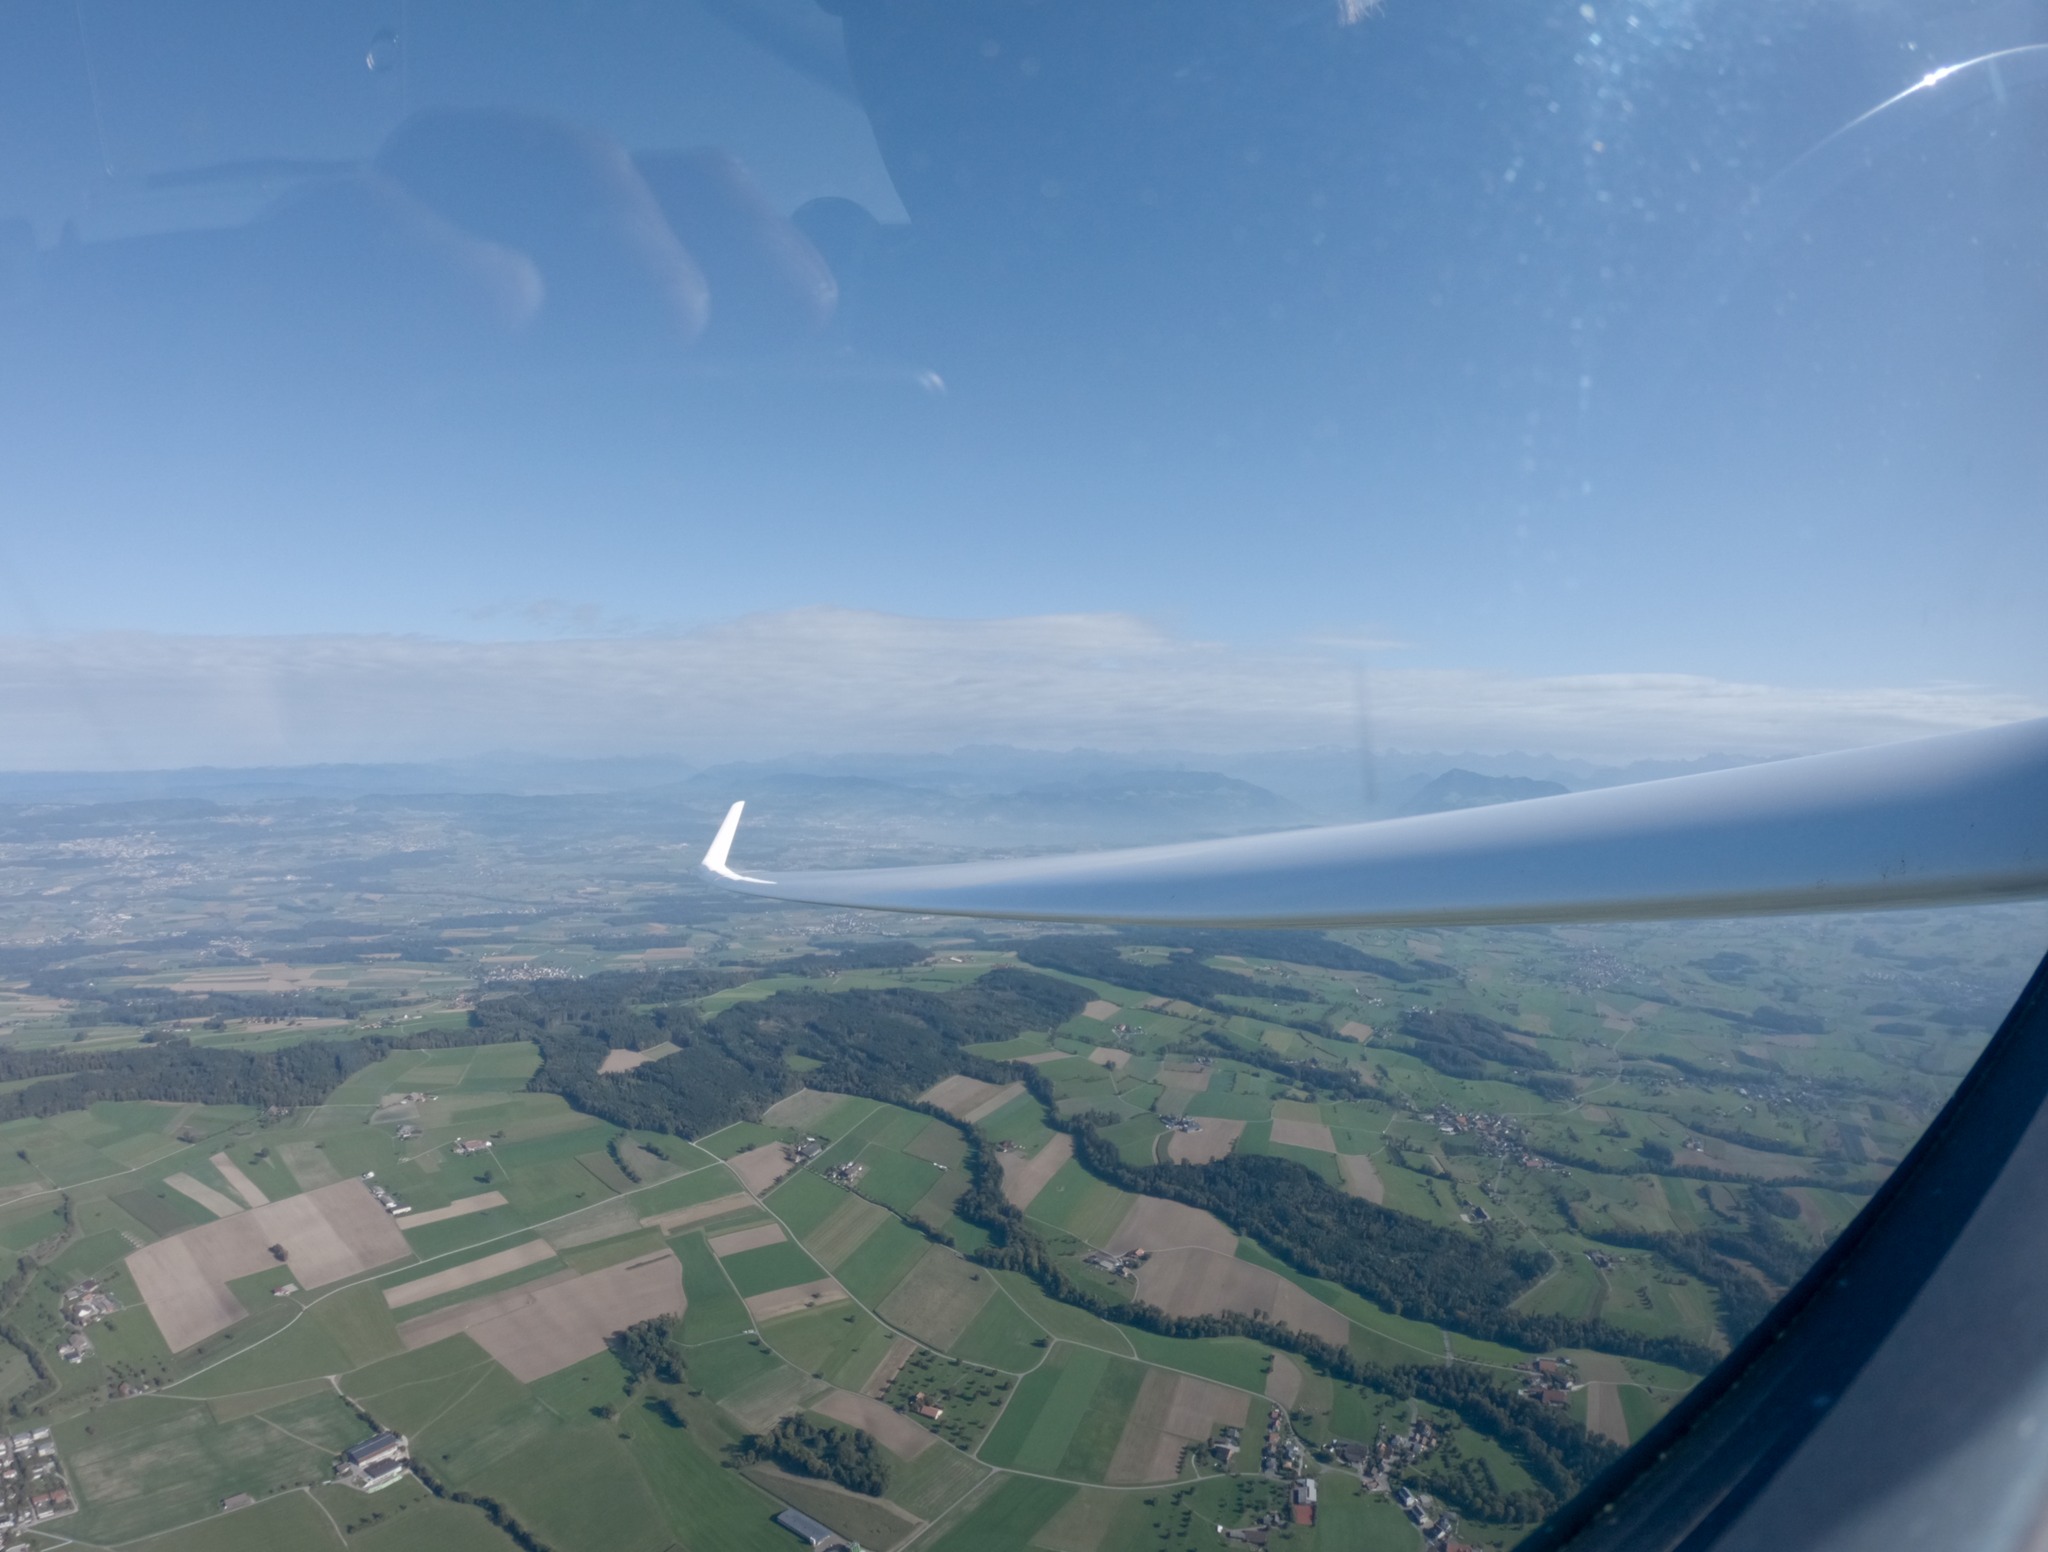 Looking back over my shoulder and the wings that carry me #gliding #soaring #segelflug #segelfliegen #volavoile #glidingpictures #pilotlife #aviation #sfvs_fsvv #sgzuerich @sg_zuerich